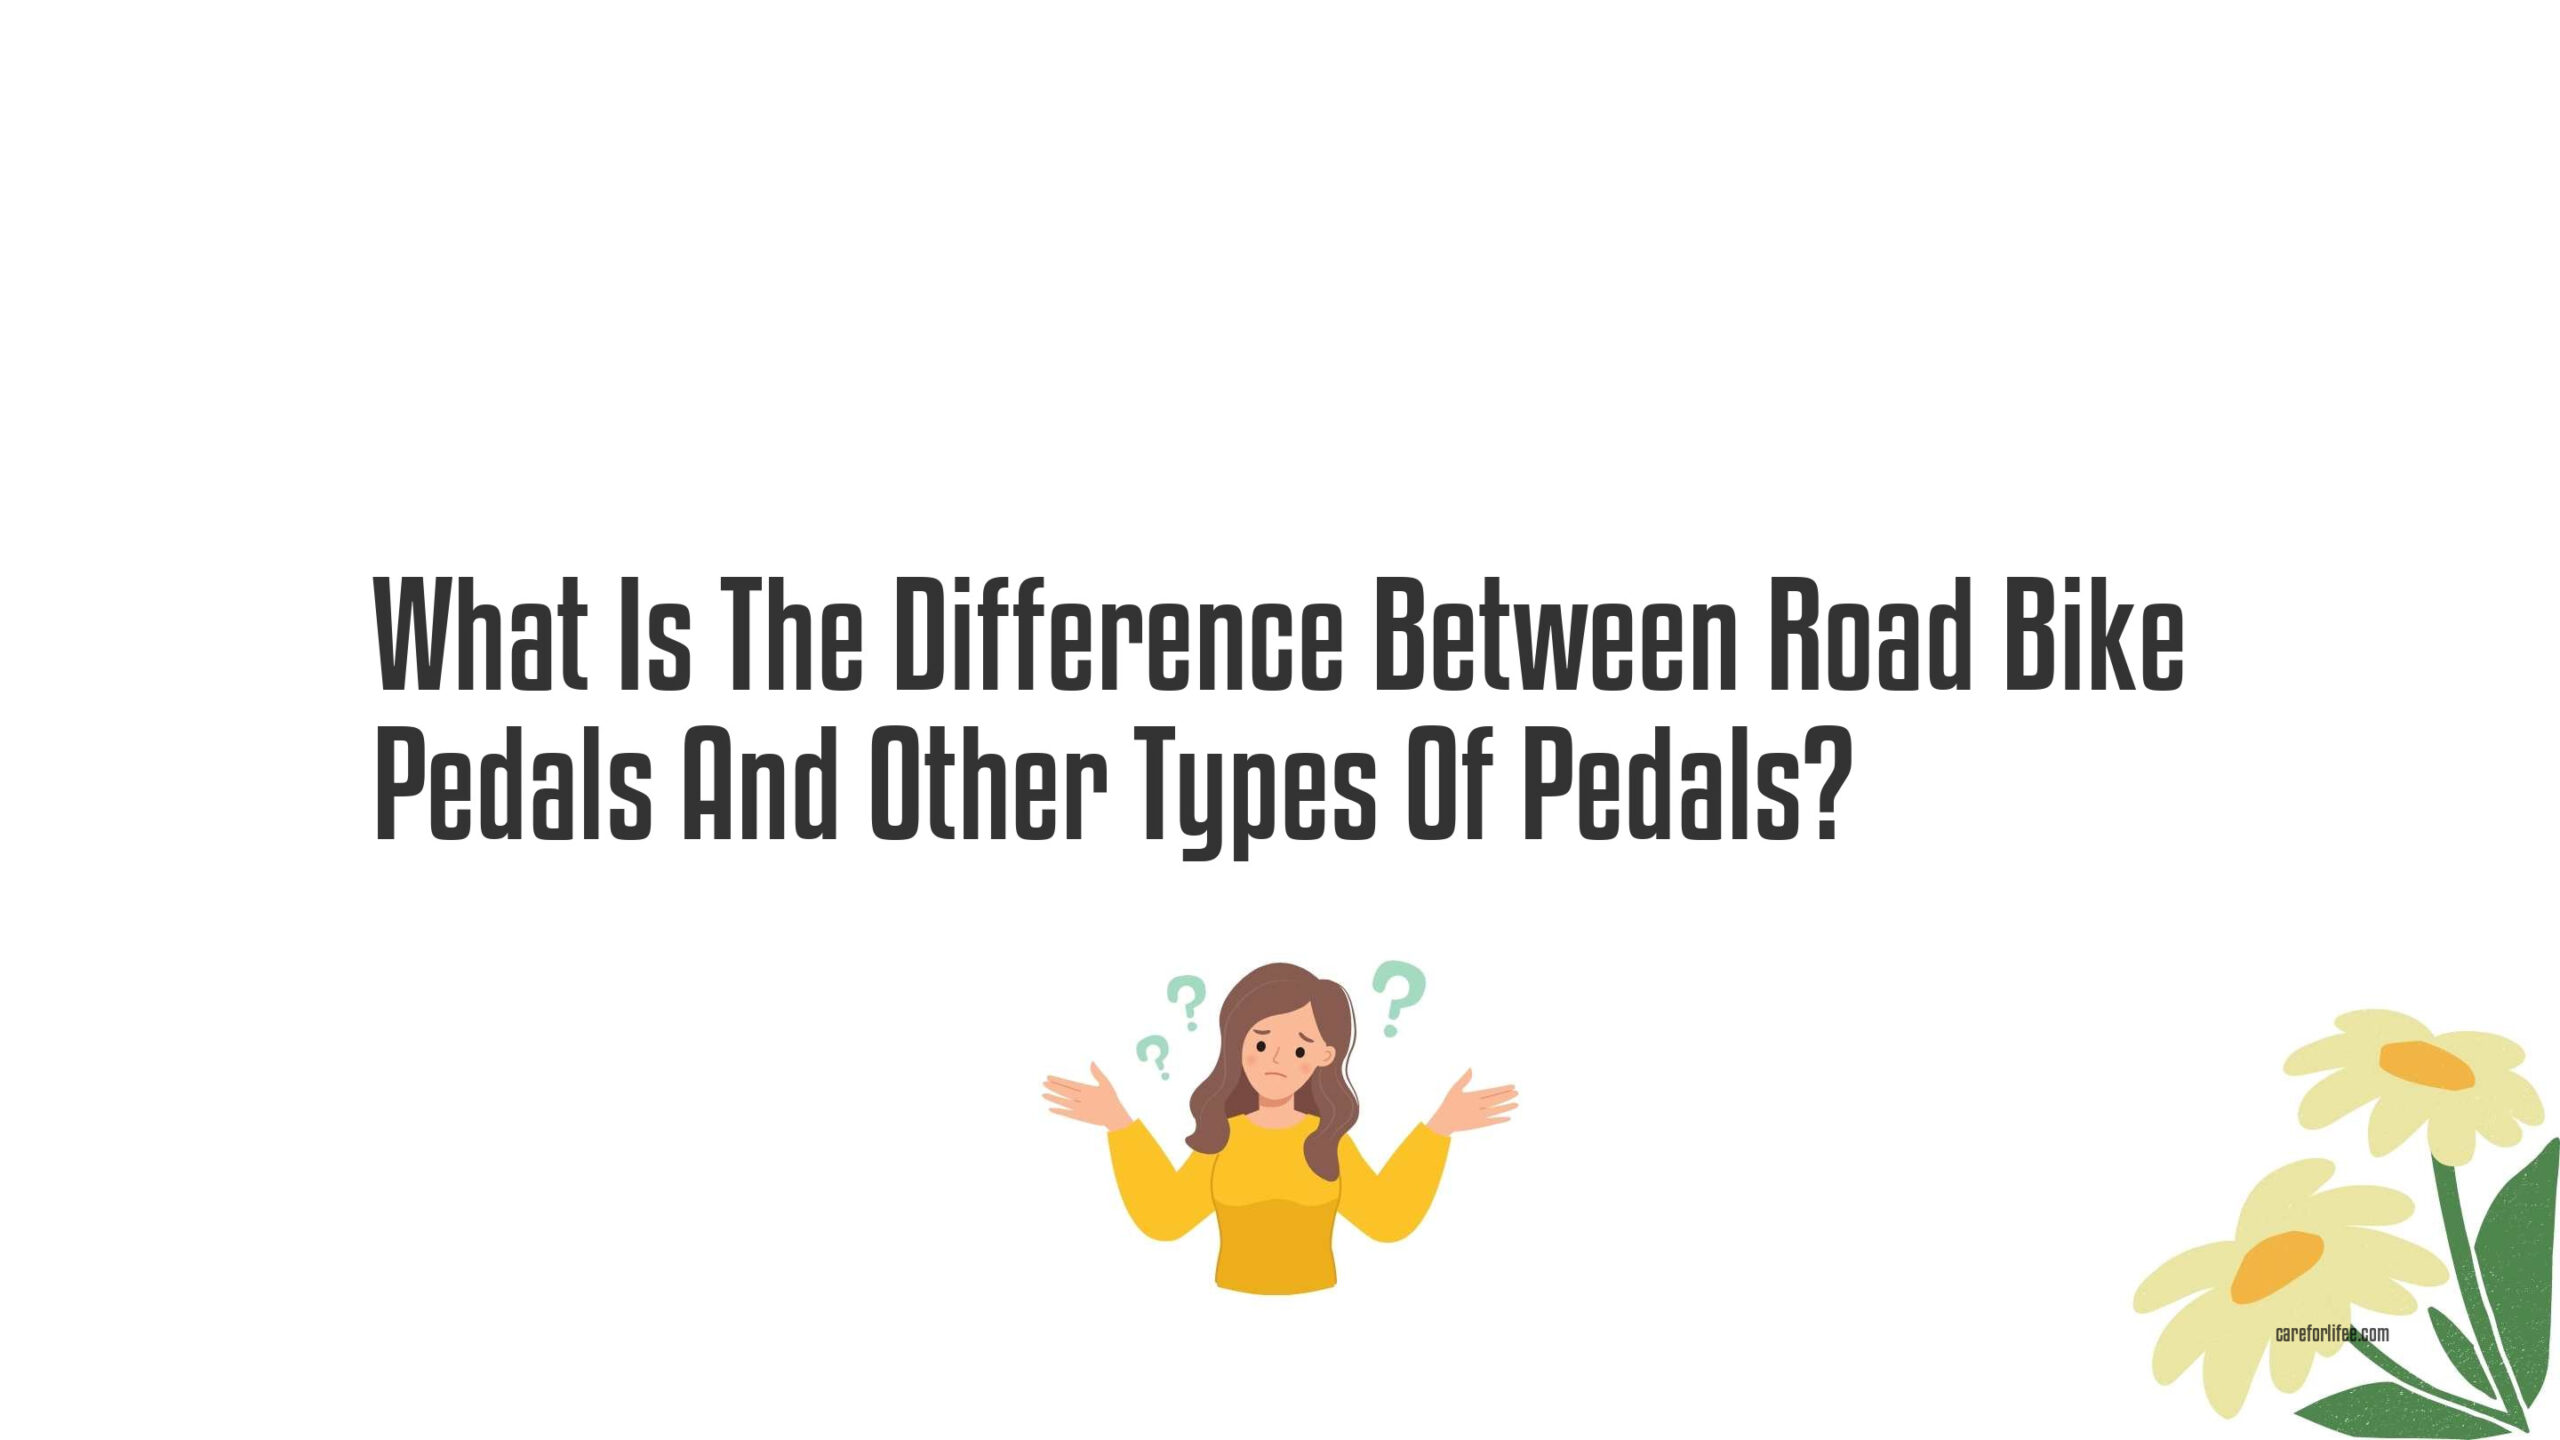 What Is The Difference Between Road Bike Pedals And Other Types Of Pedals?